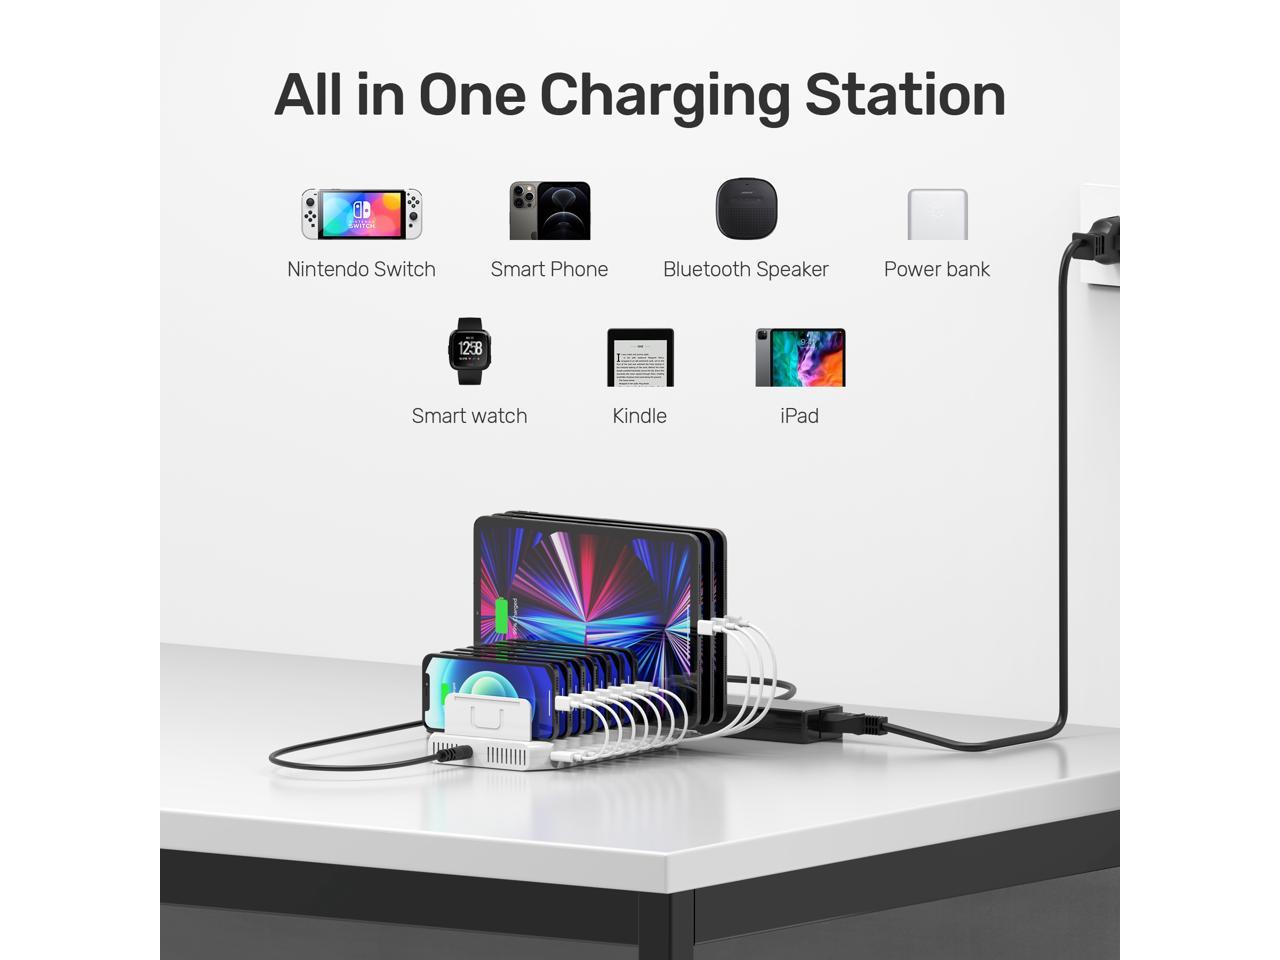 UL Certified Multi USB Charger Station for Multiple Devices Tablet iPhone iPad Kindle-Black Unitek Fast Charging Station with Quick Charge 3.0 